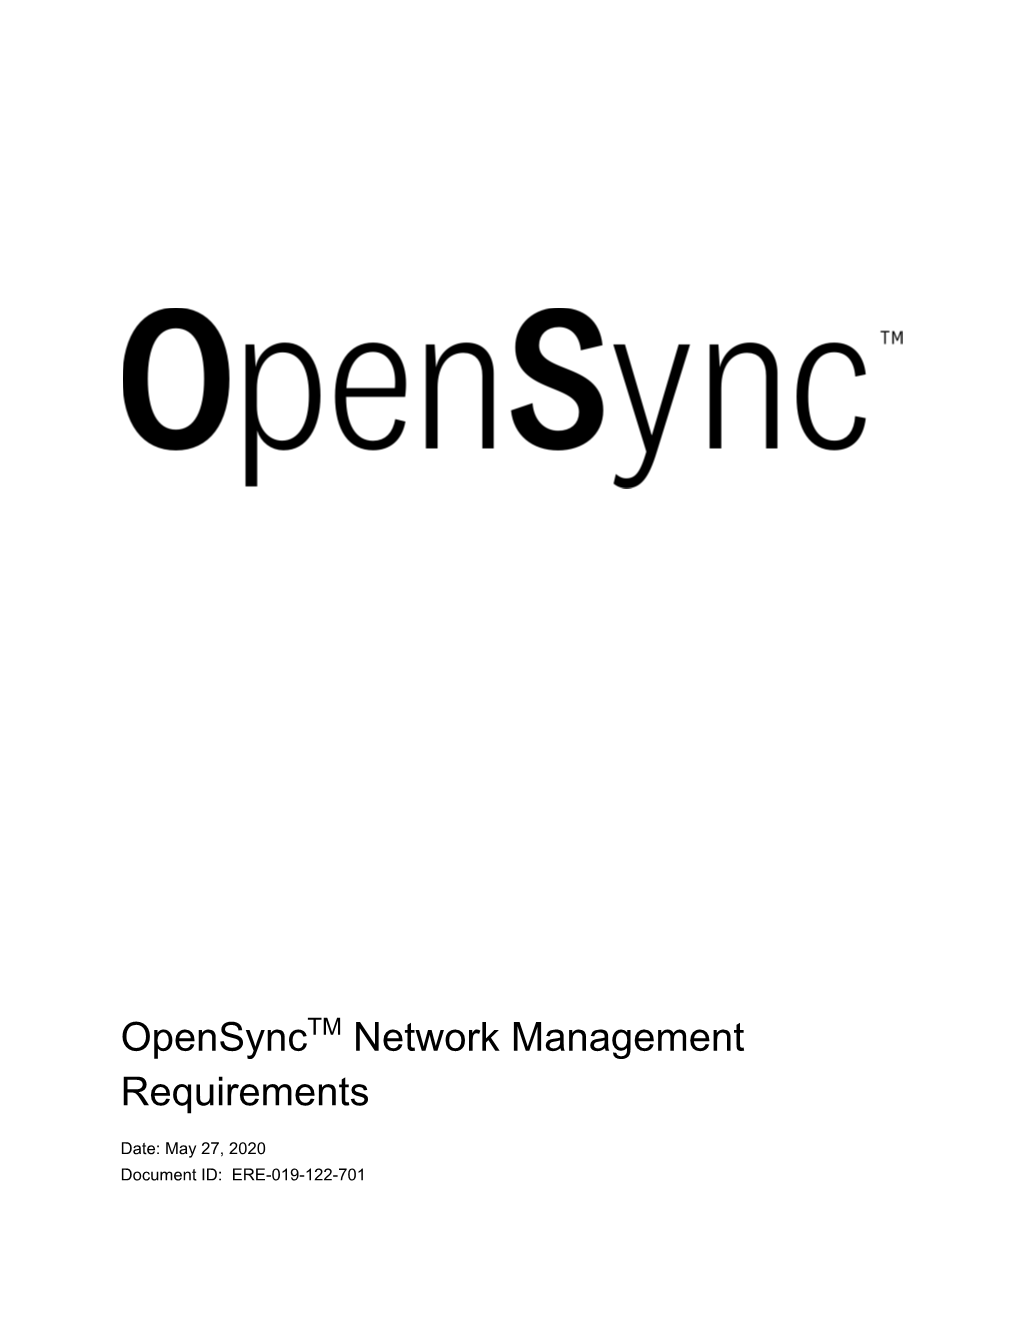 ERE-019-122-701 Opensync Requirement: Network Management